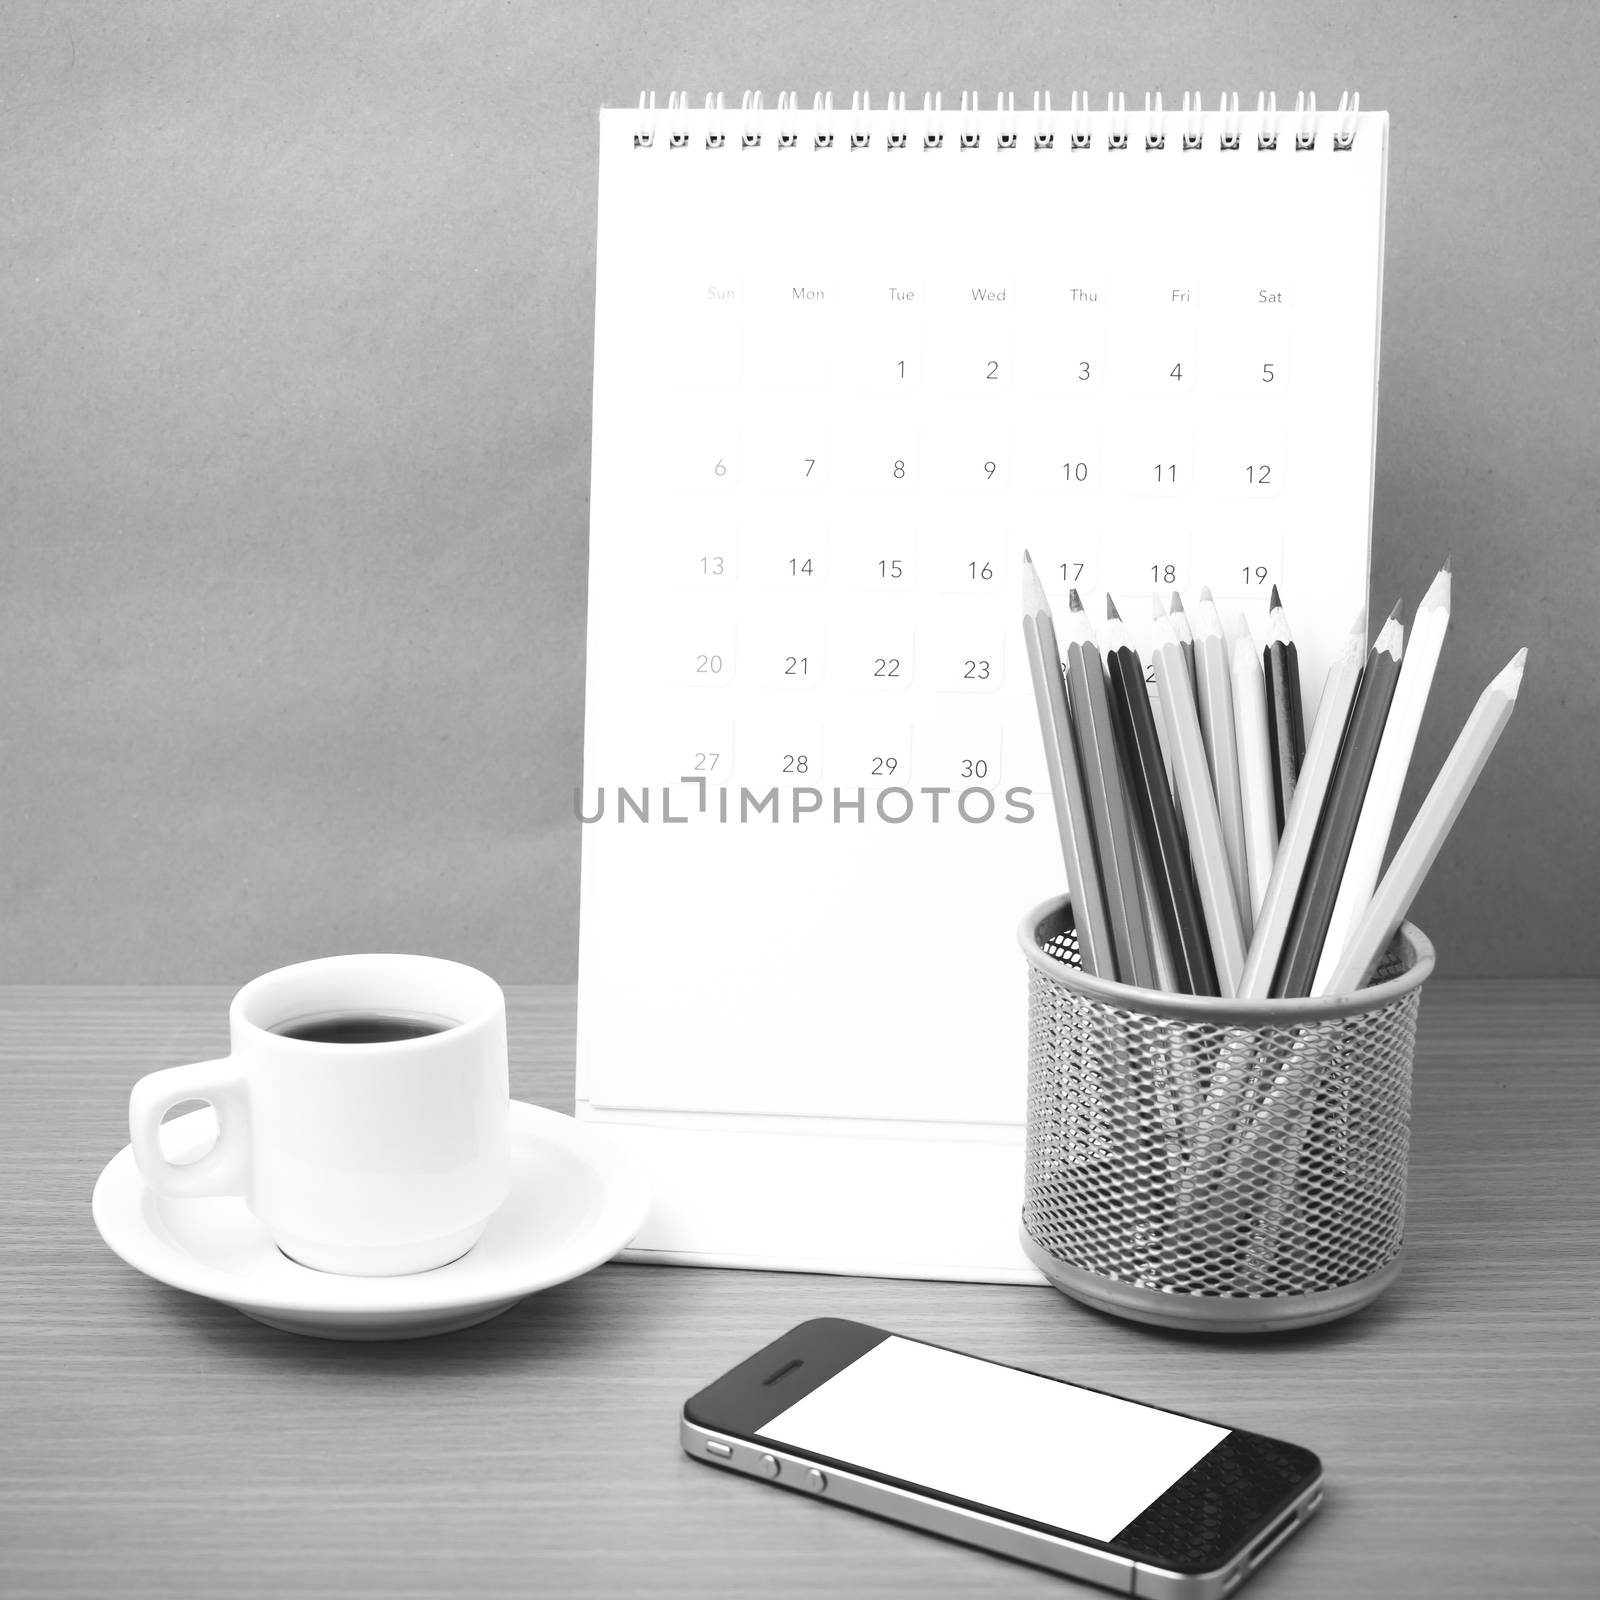 coffee,phone,calendar and color pencil on wood table background black and white color